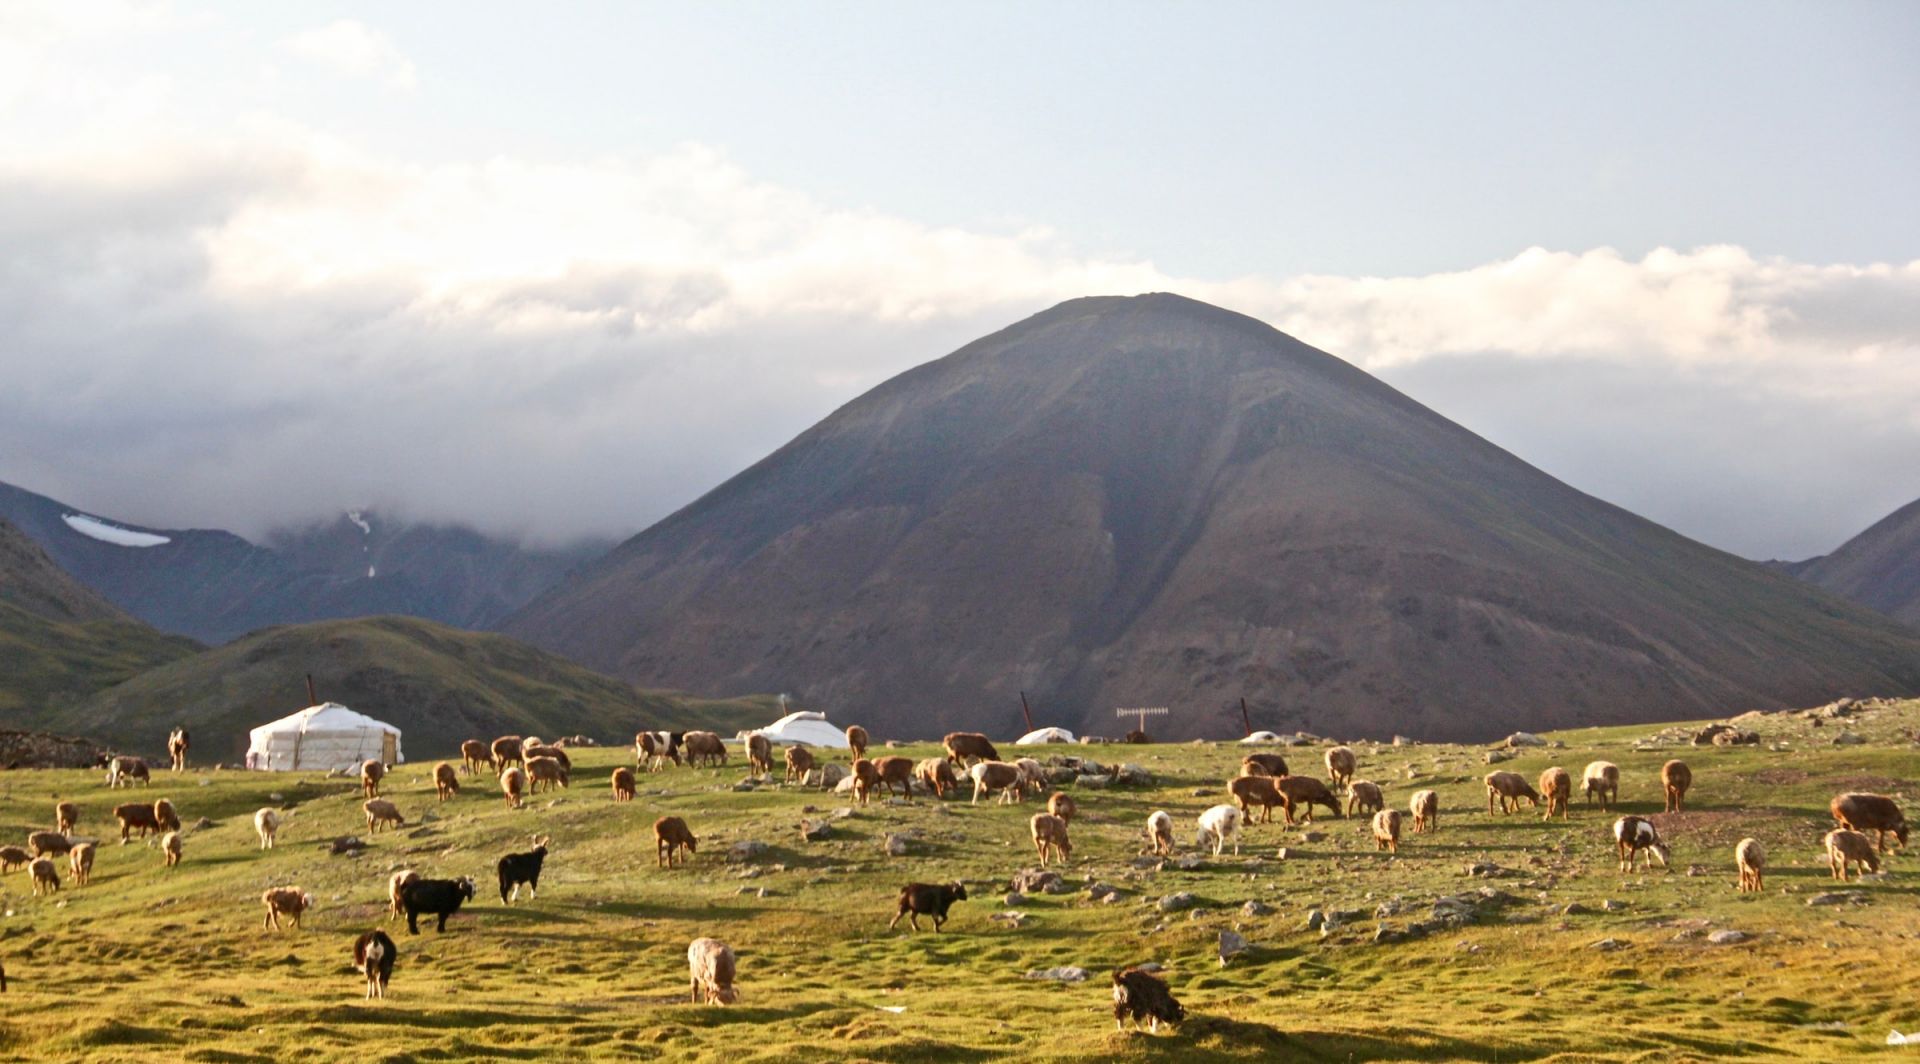 Flock of herd in the Mongolian countryside